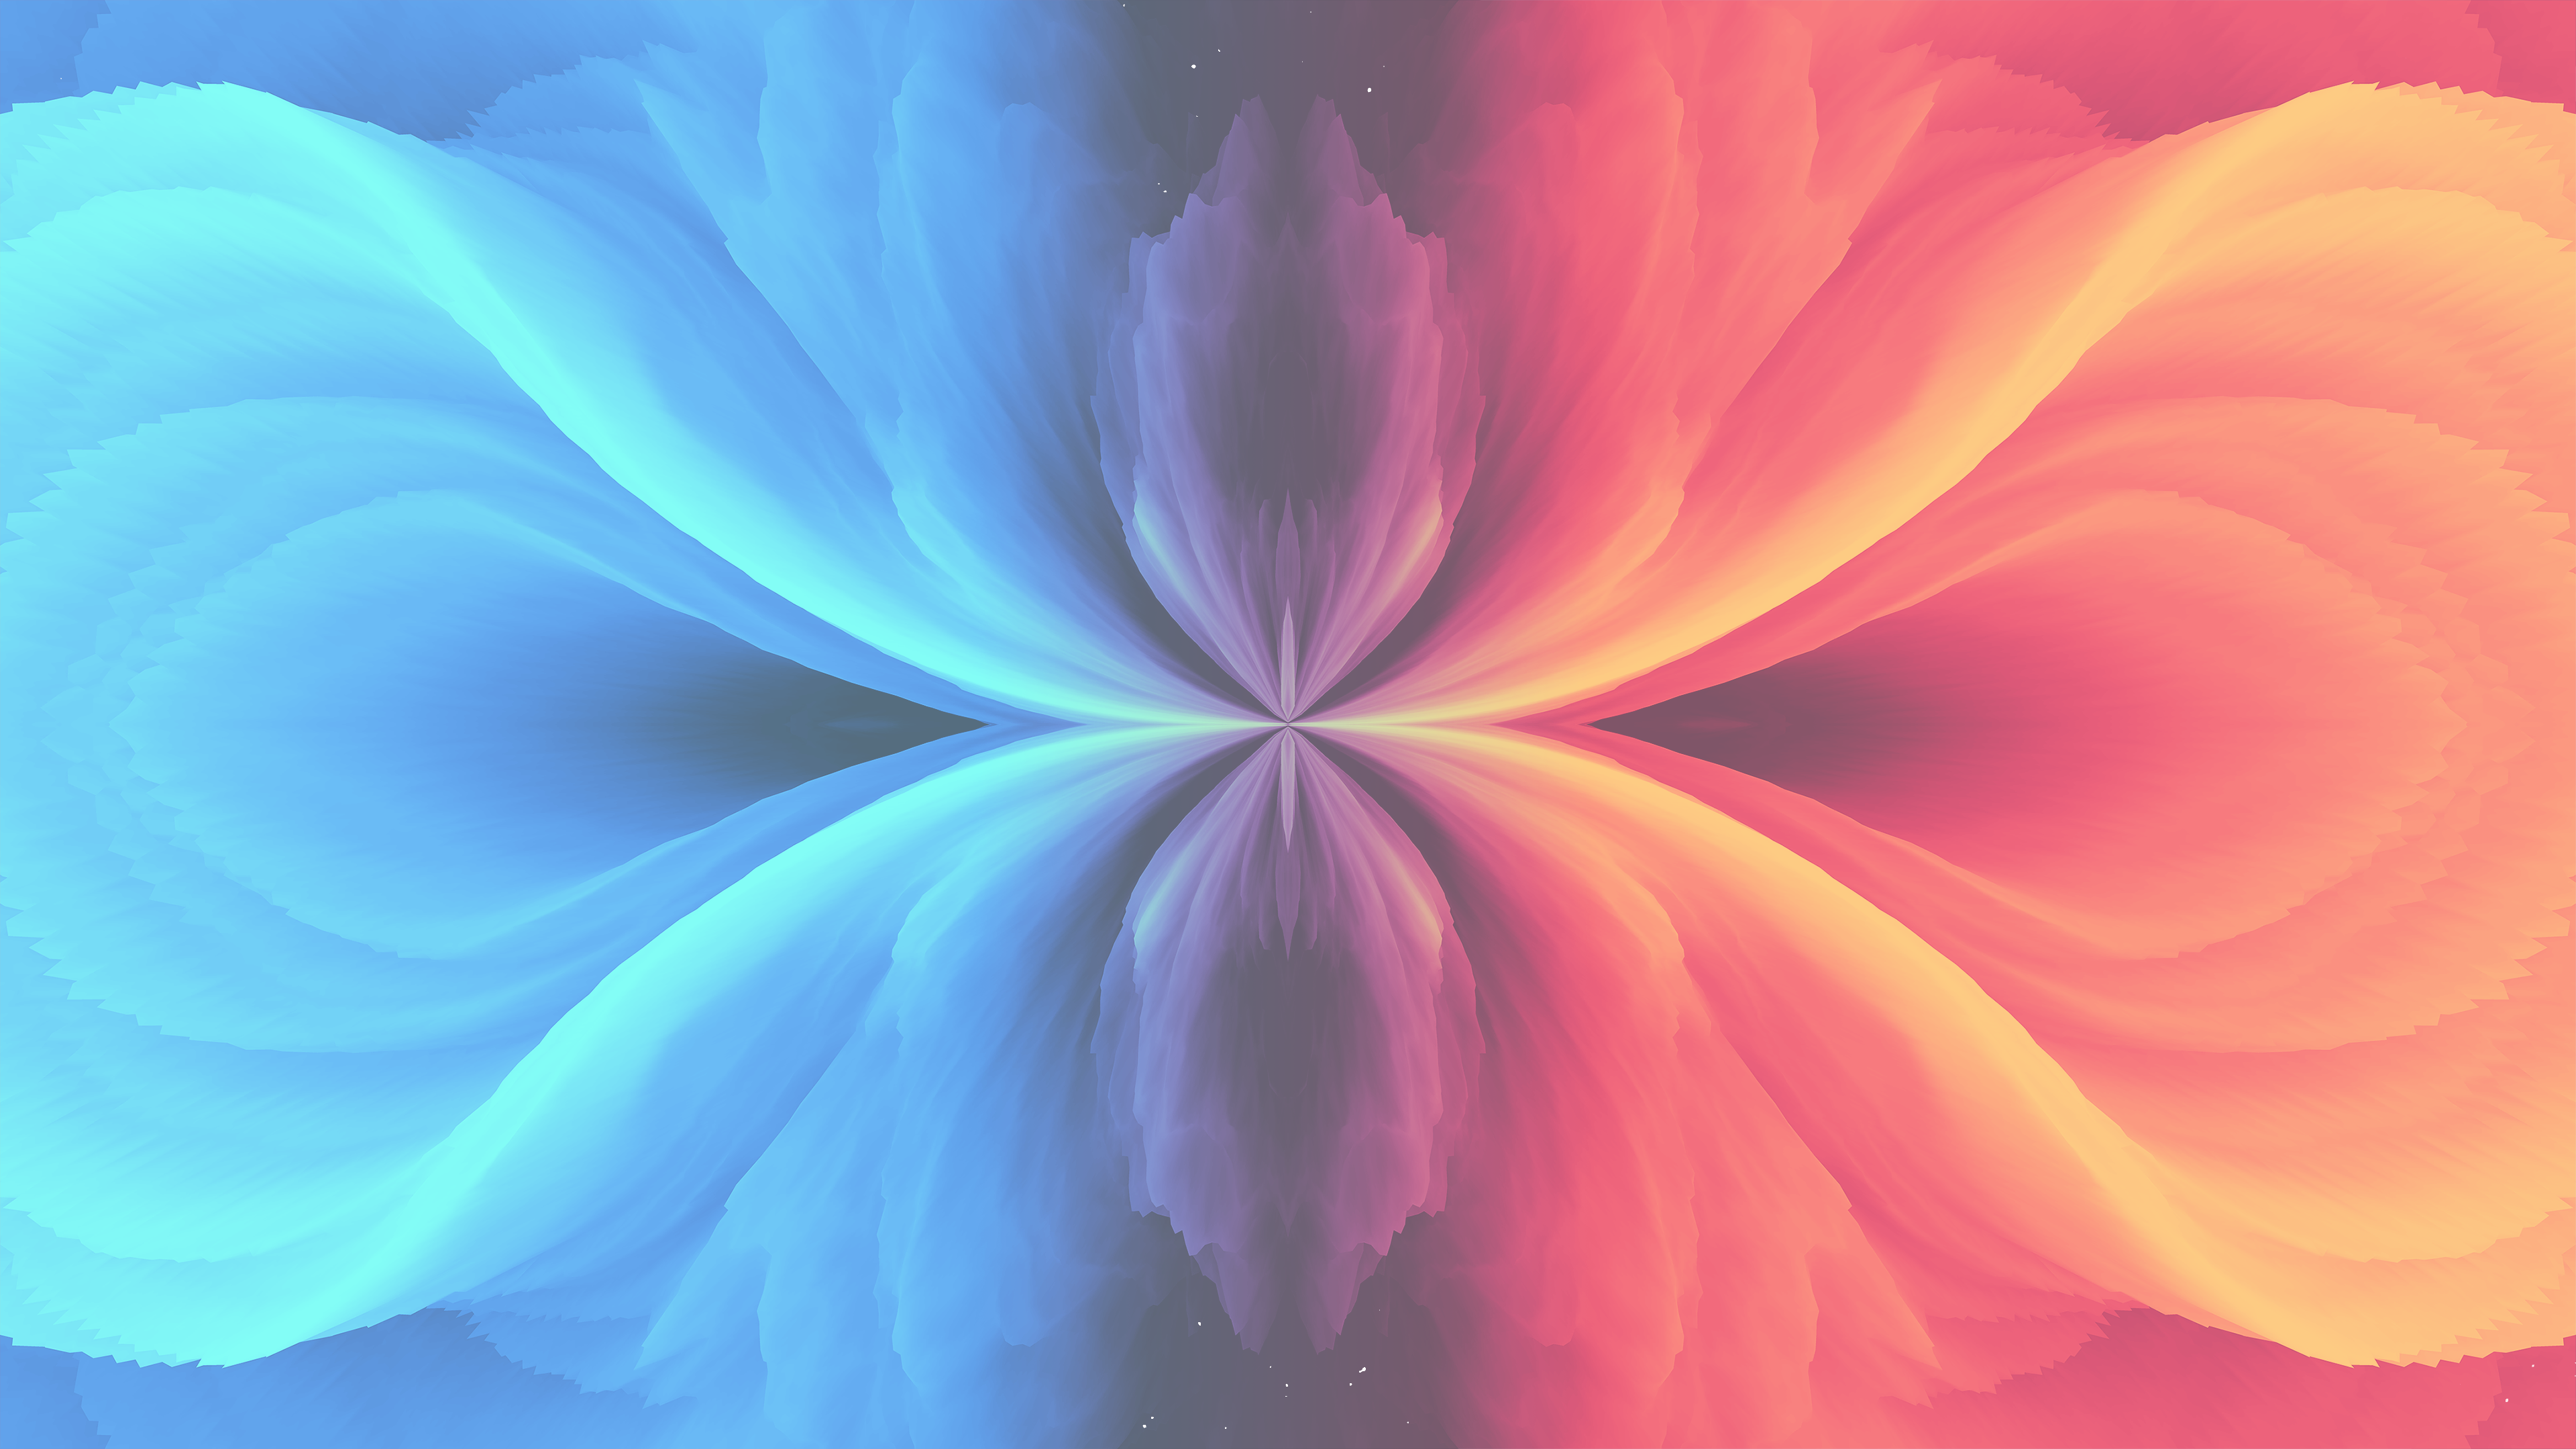 Fractal Digital Art Contrast Blue Red Mirrored Abstract 3840x2160